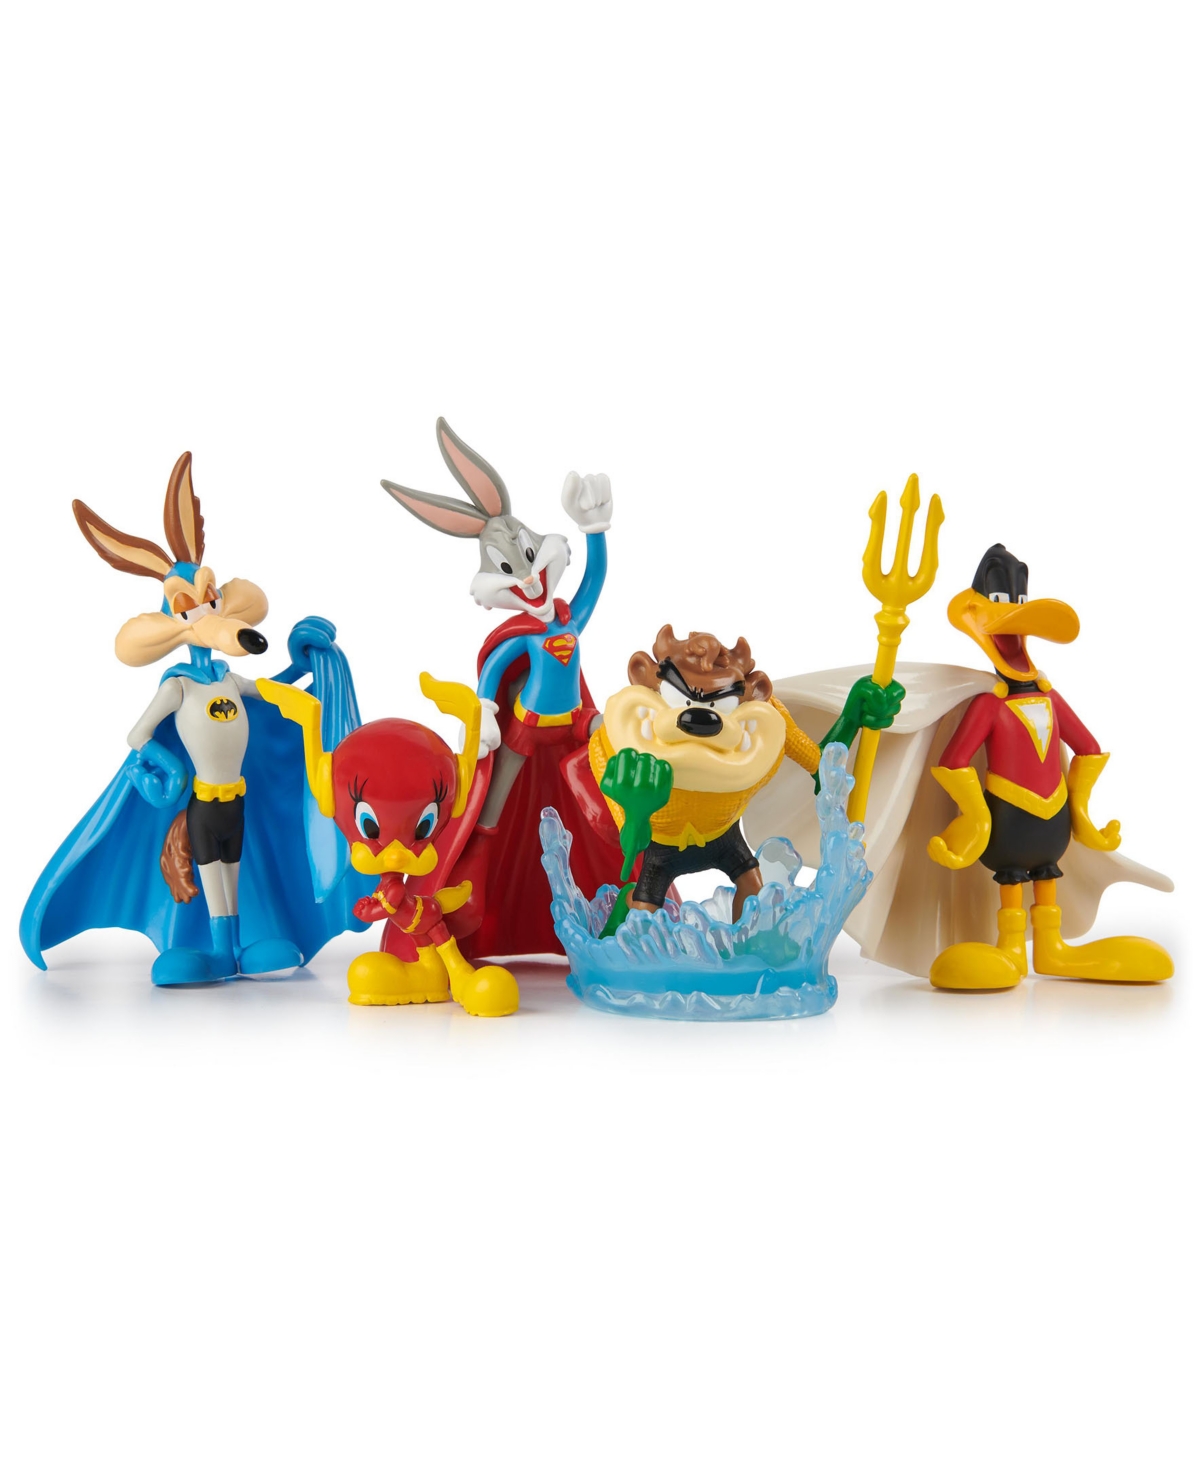 Dc Comics , Looney Tunes Mash-up Pack, Limited Edition Wb 100 Years Anniversary, 5 Looney Tunes X Dc Figures In Multi-color